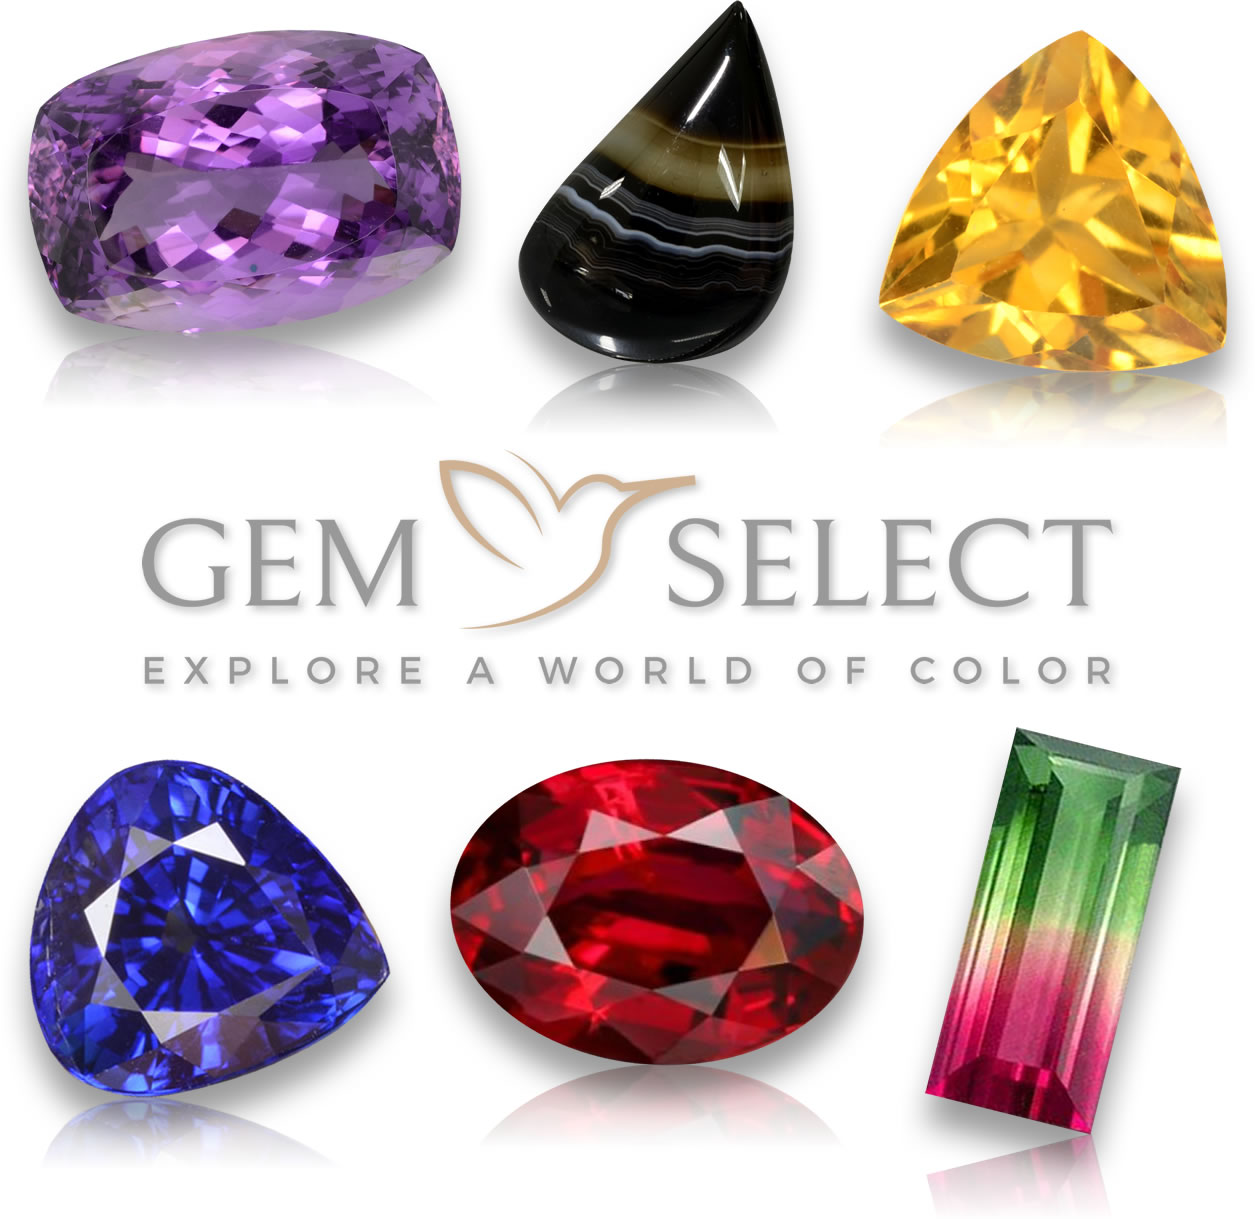 Gems Gems and Gems! I recently inherited my late dad's loose gemstones  collection. I have been sorting them and getting them organized so I can  have someone help me figure what they